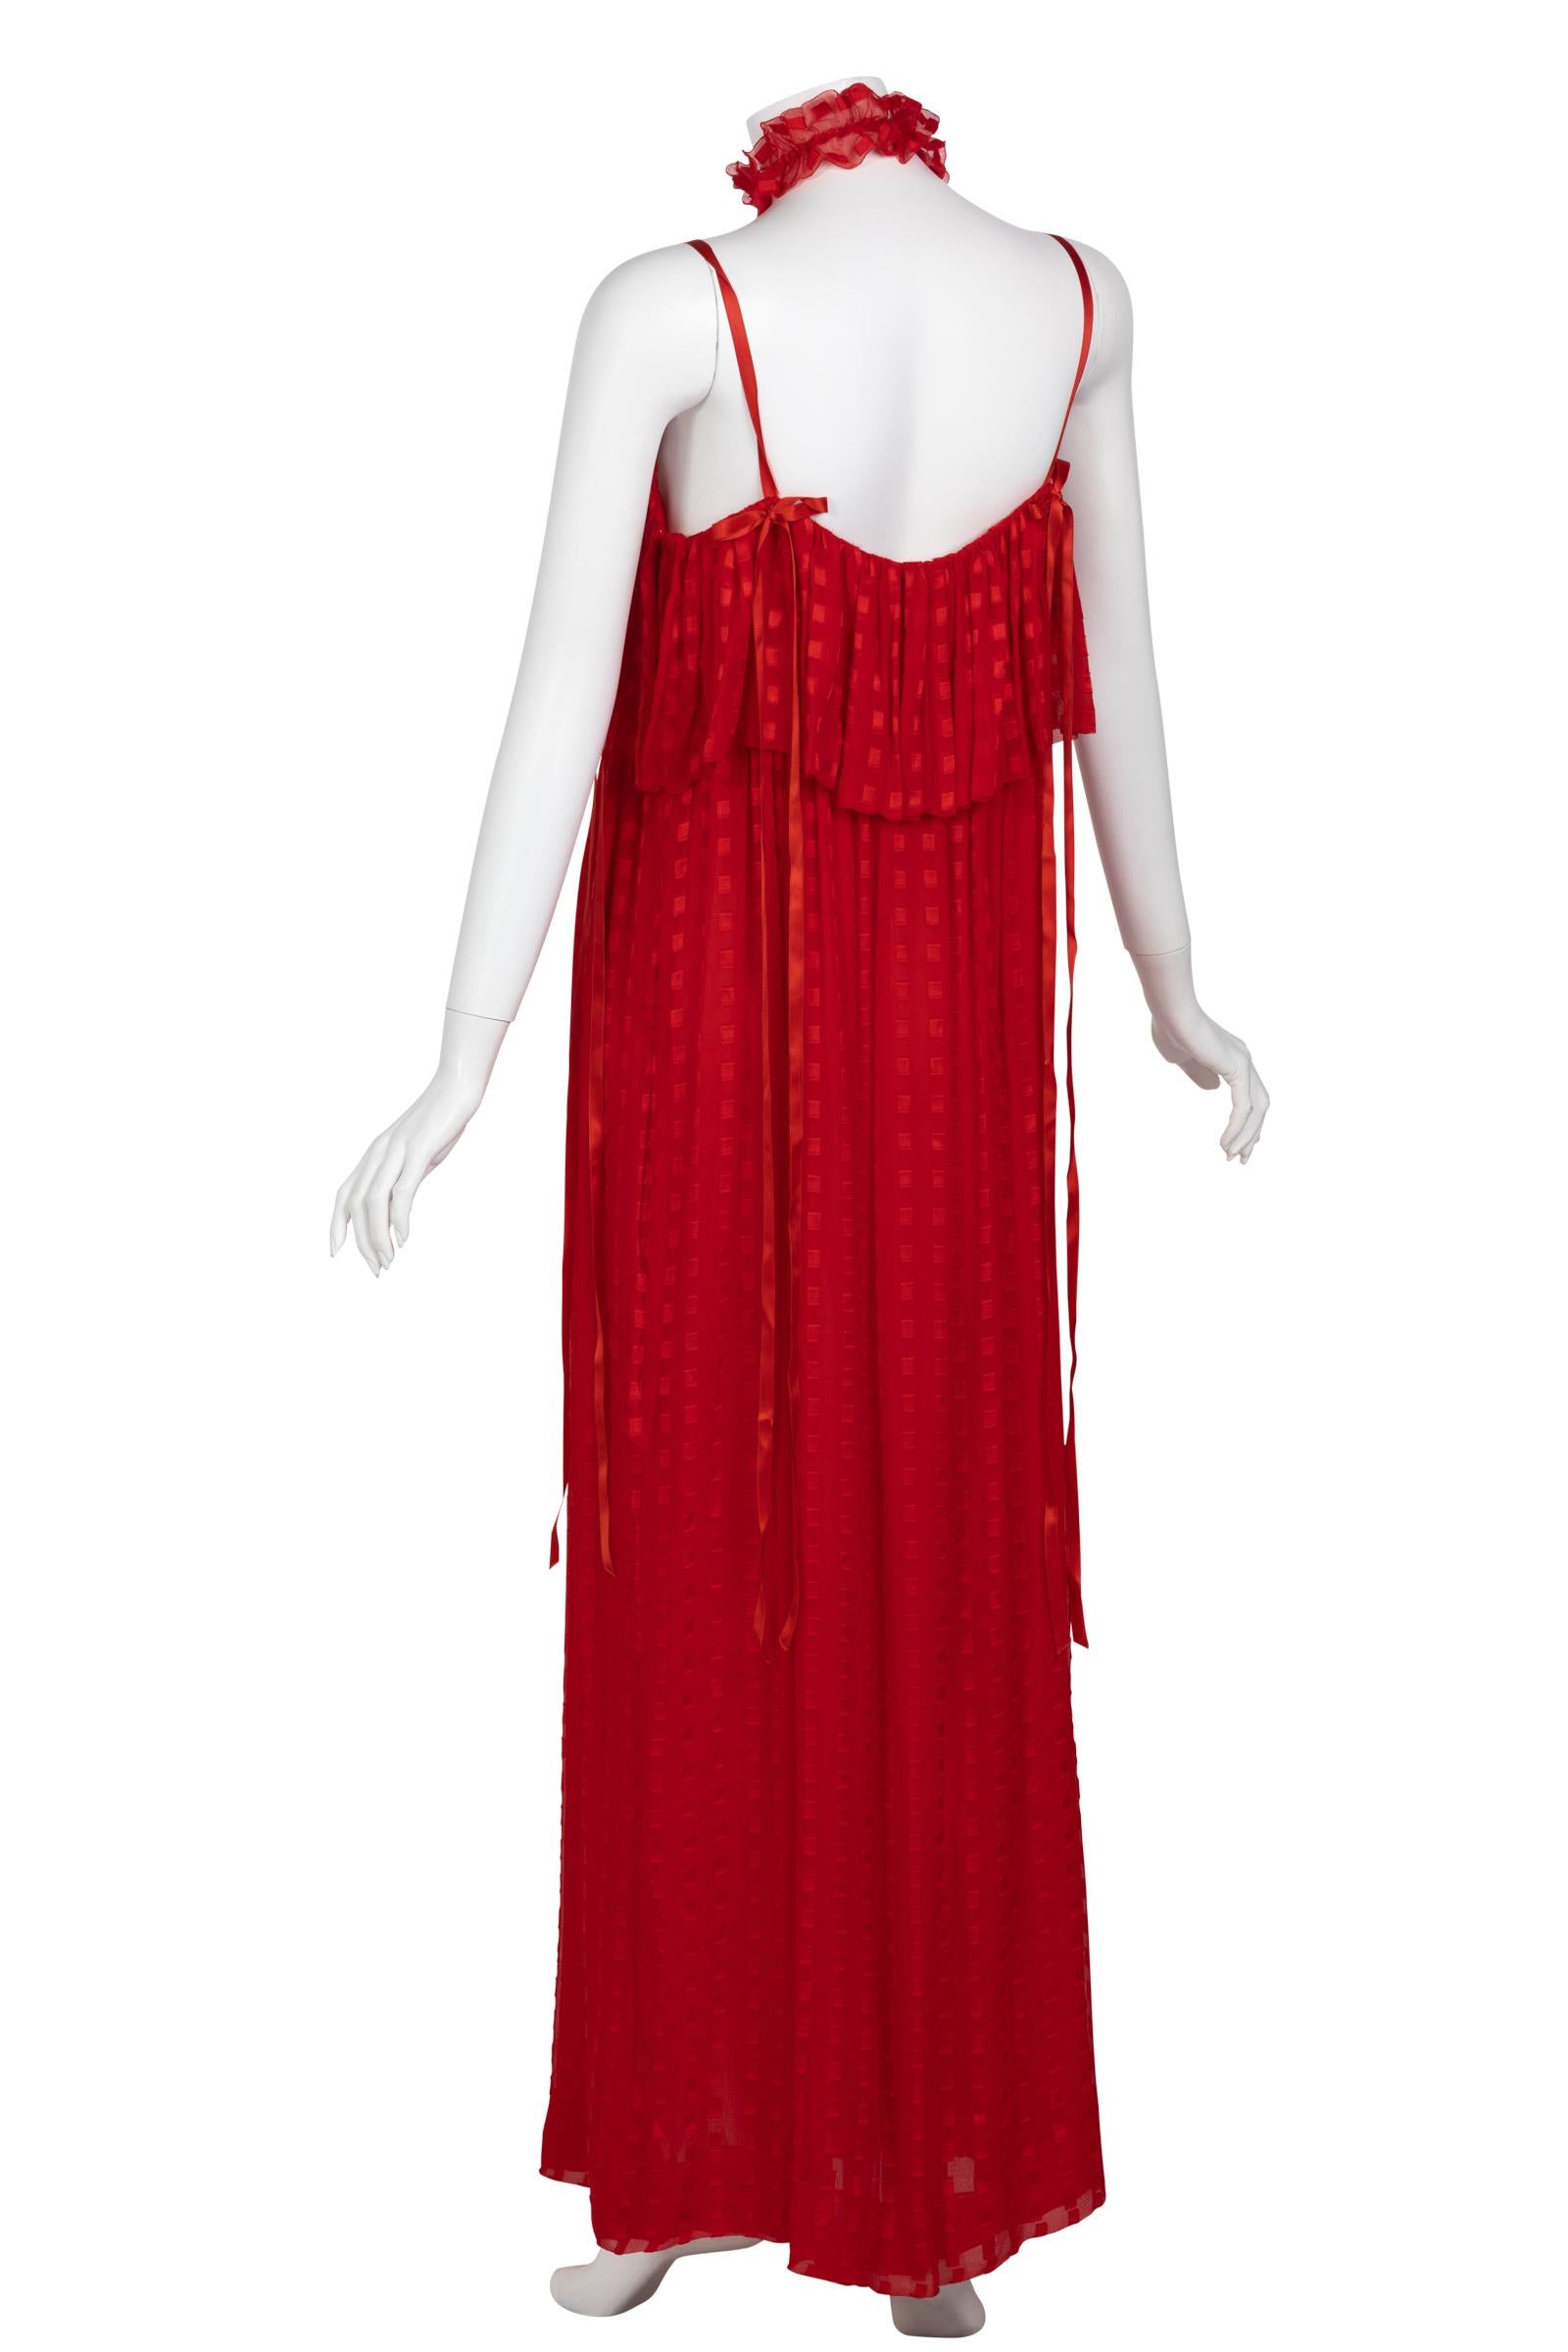 Christian Dior Red Maxi Dress & Shawl Documented 1970s 3